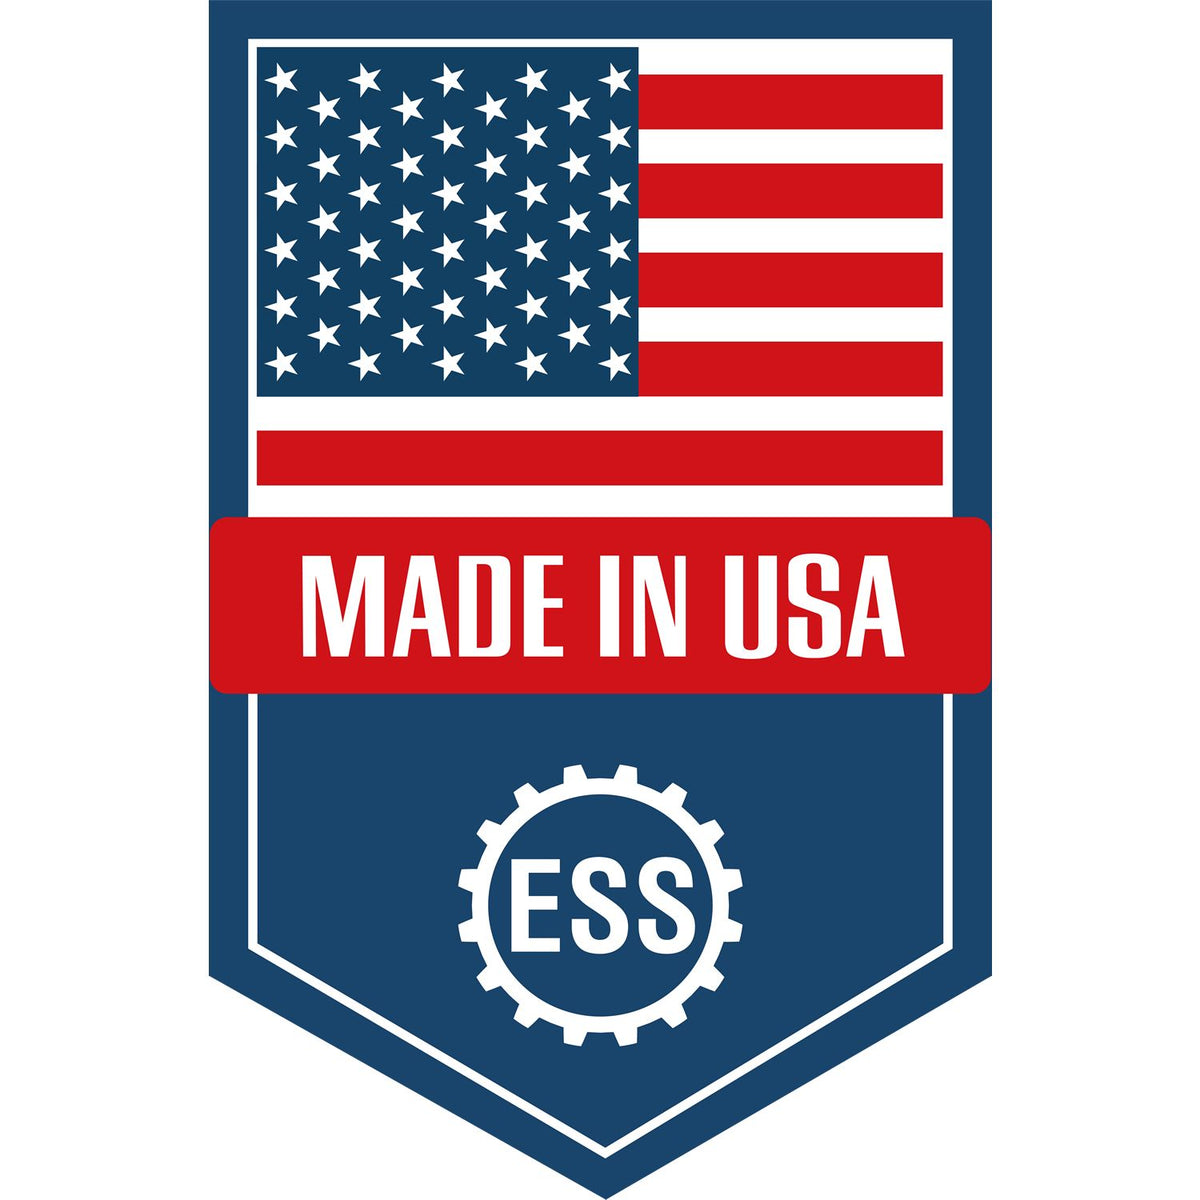 An icon or graphic with an american flag and text reading Made in USA for the Soft California Professional Engineer Seal